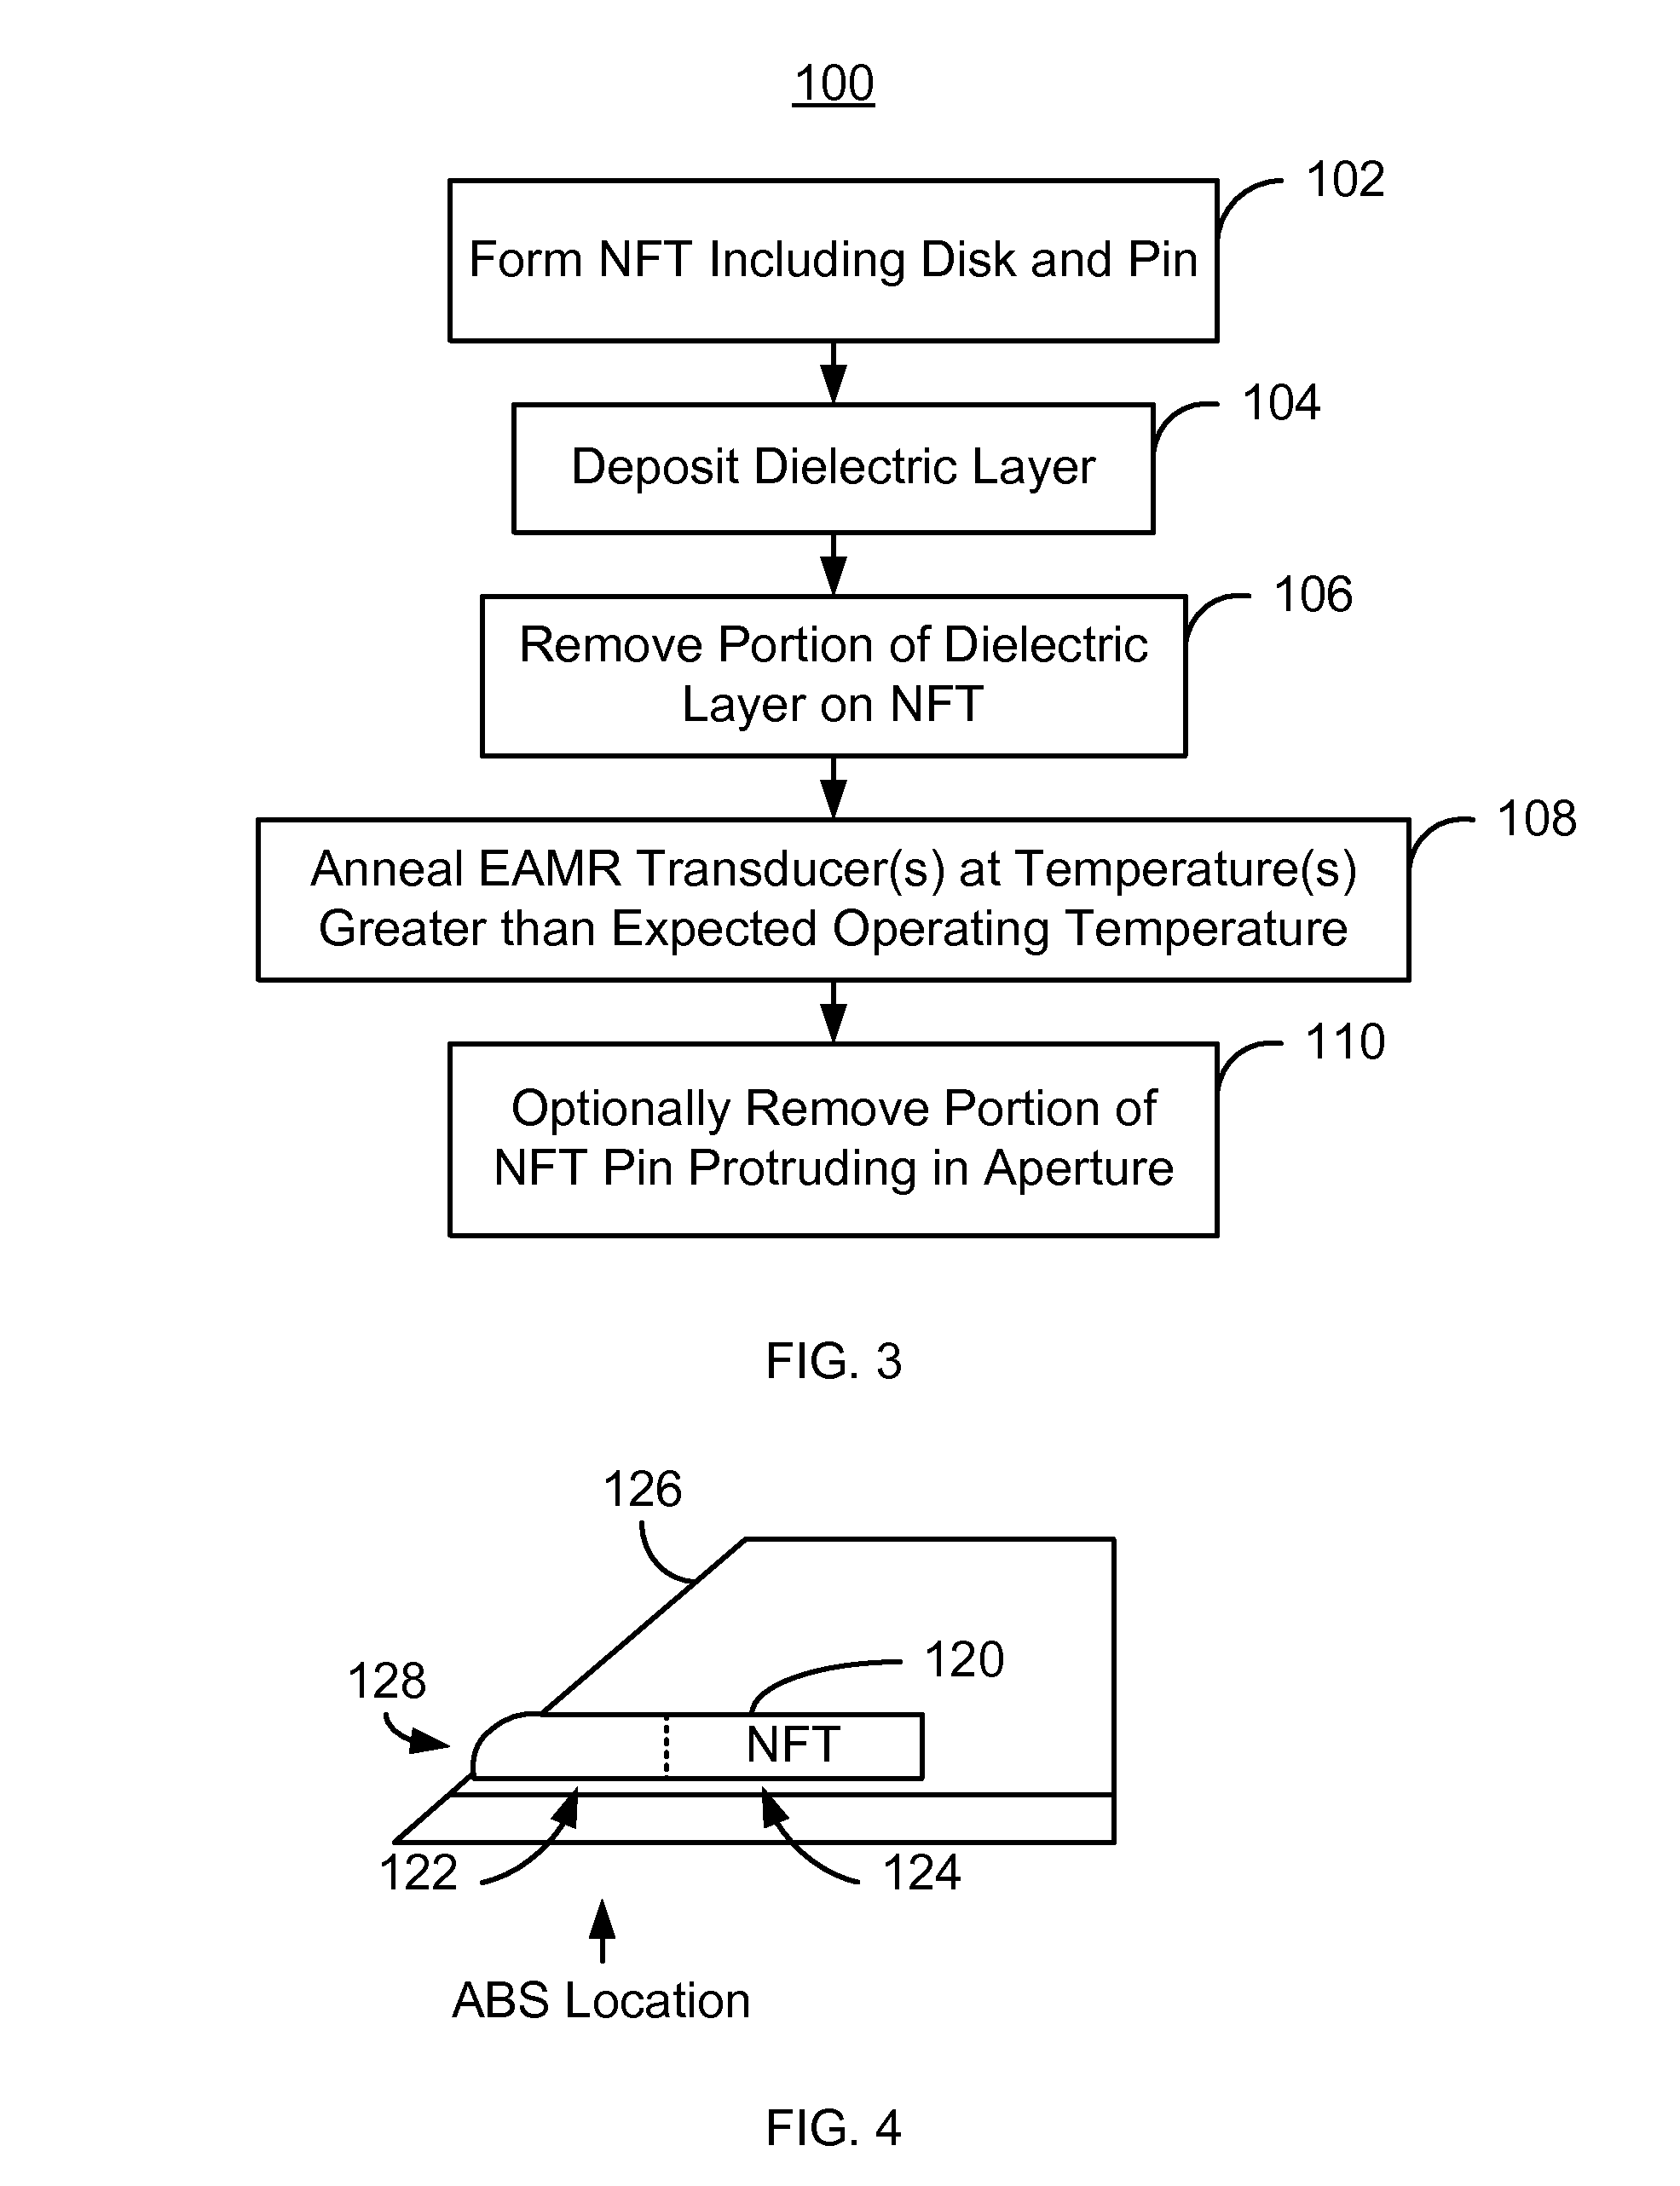 Method and system for reducing thermal protrusion of an NFT